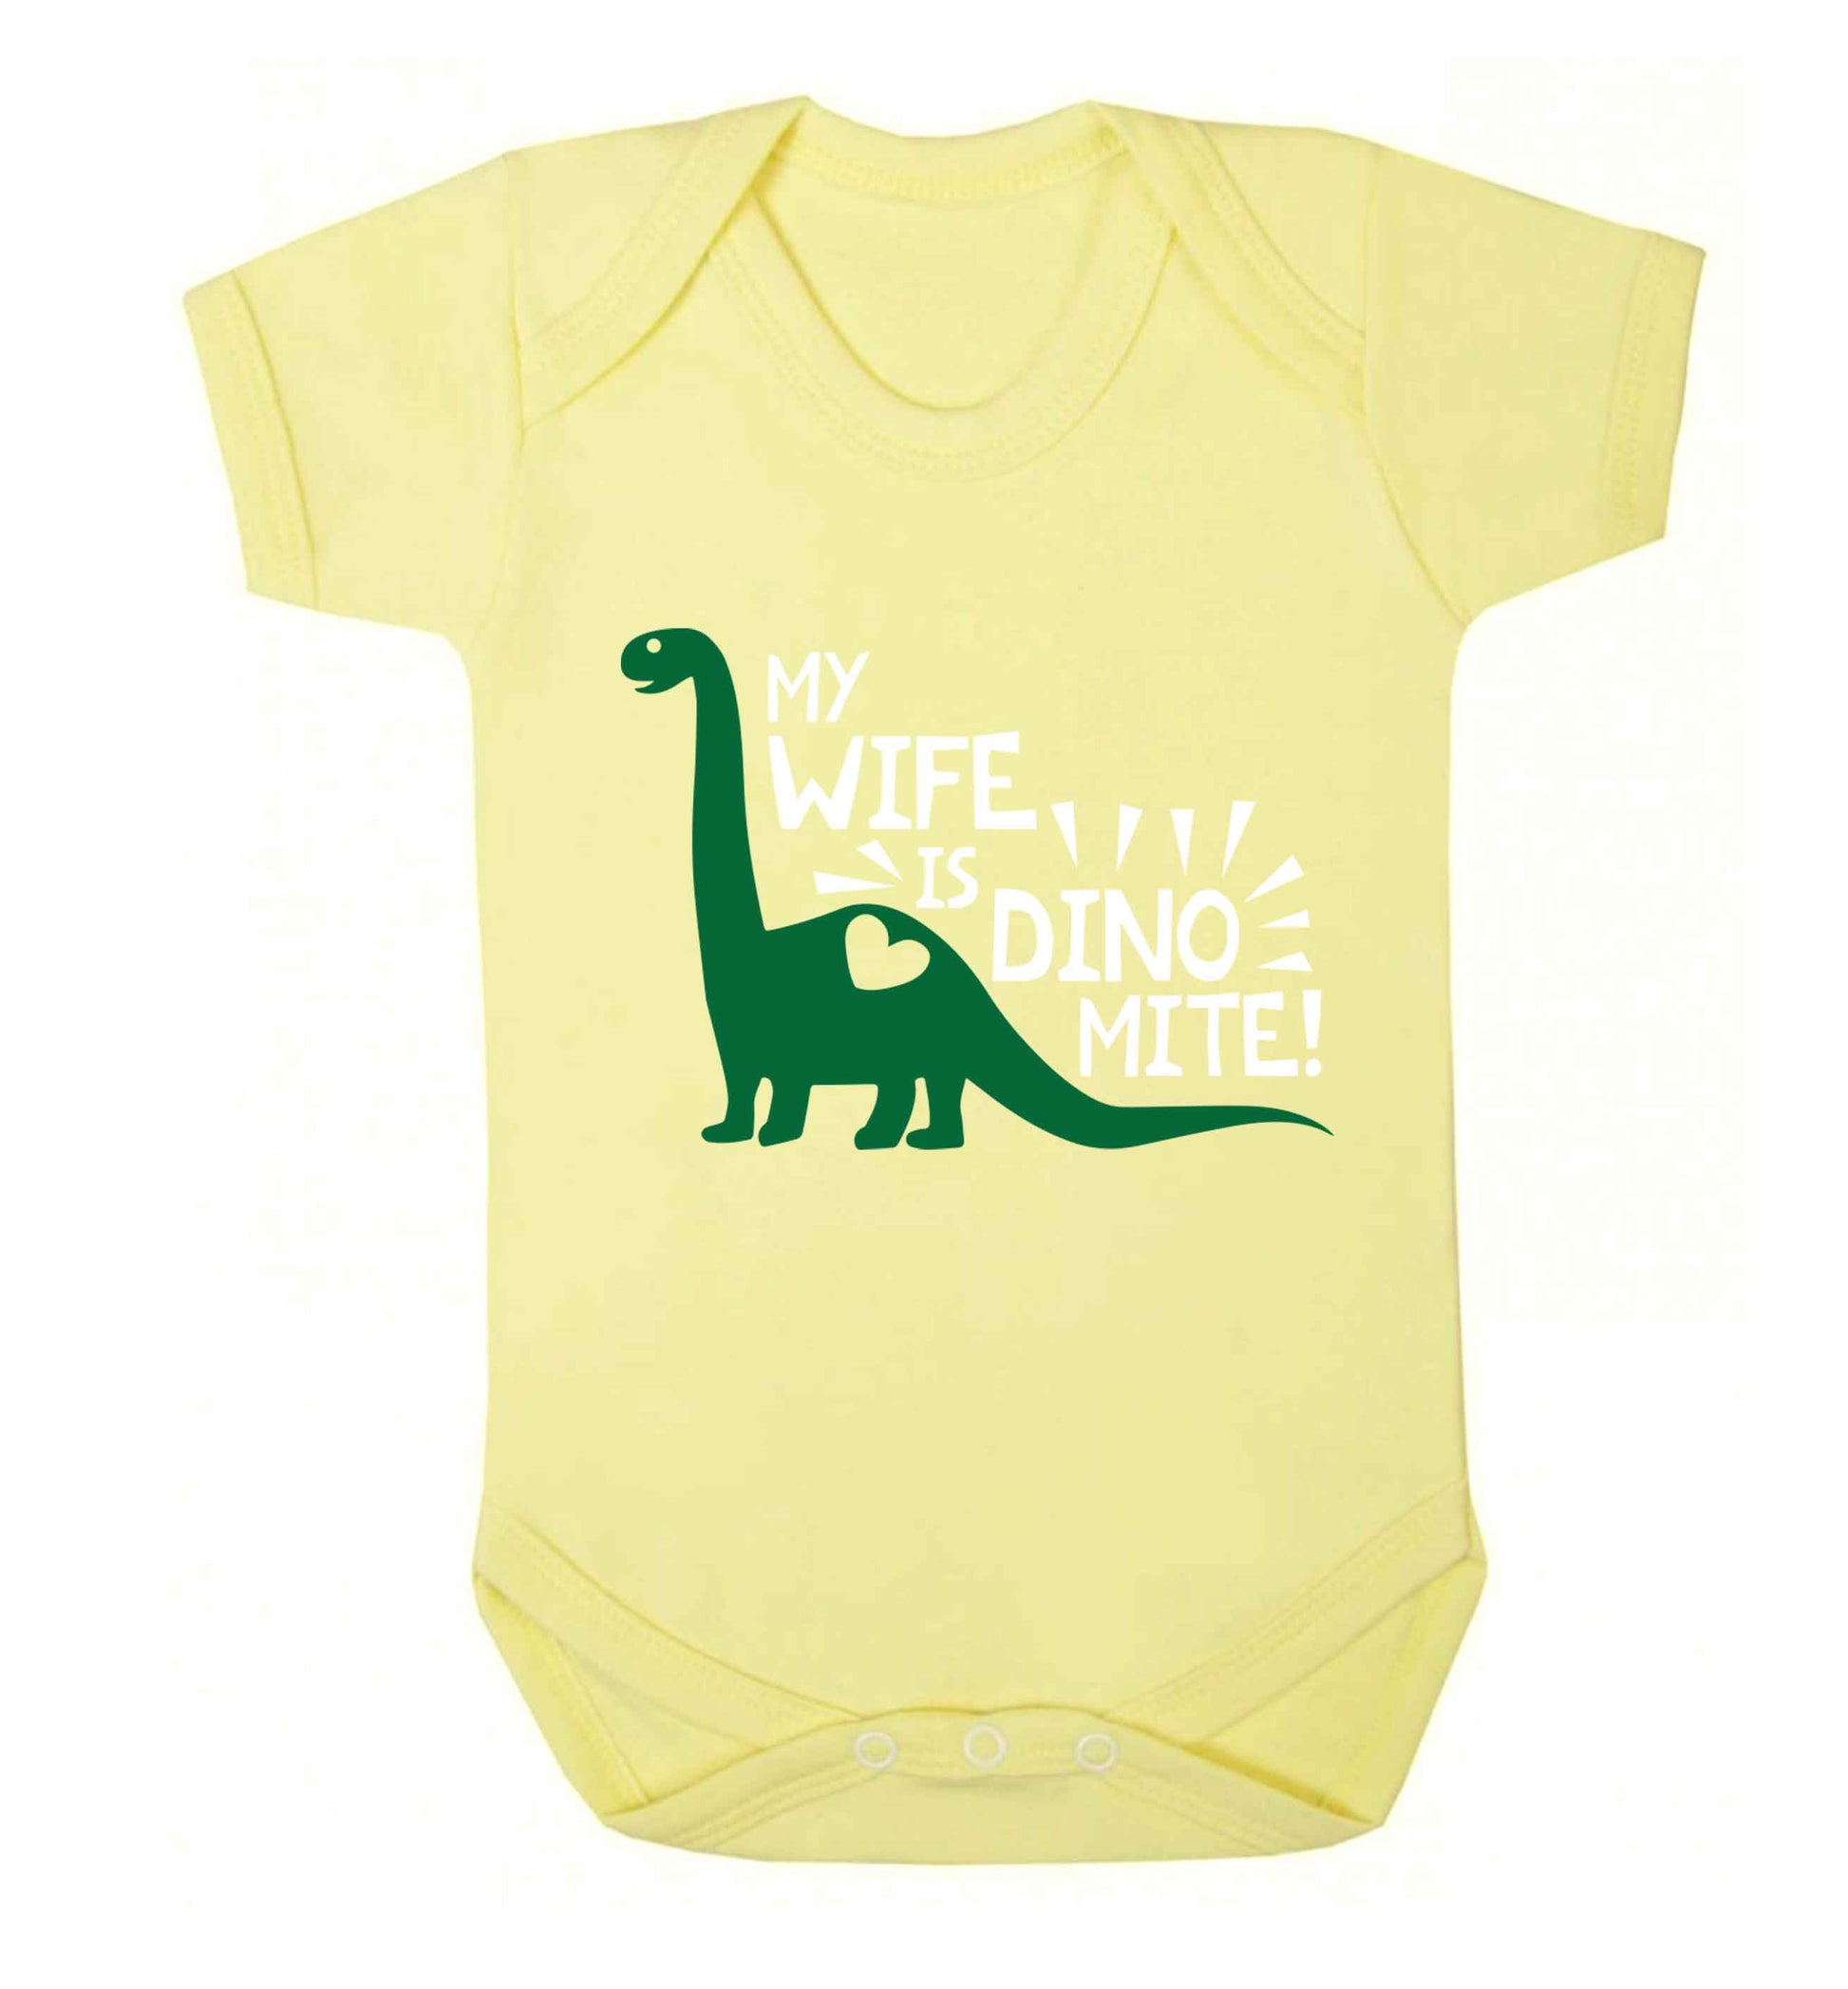 My wife is dinomite! Baby Vest pale yellow 18-24 months